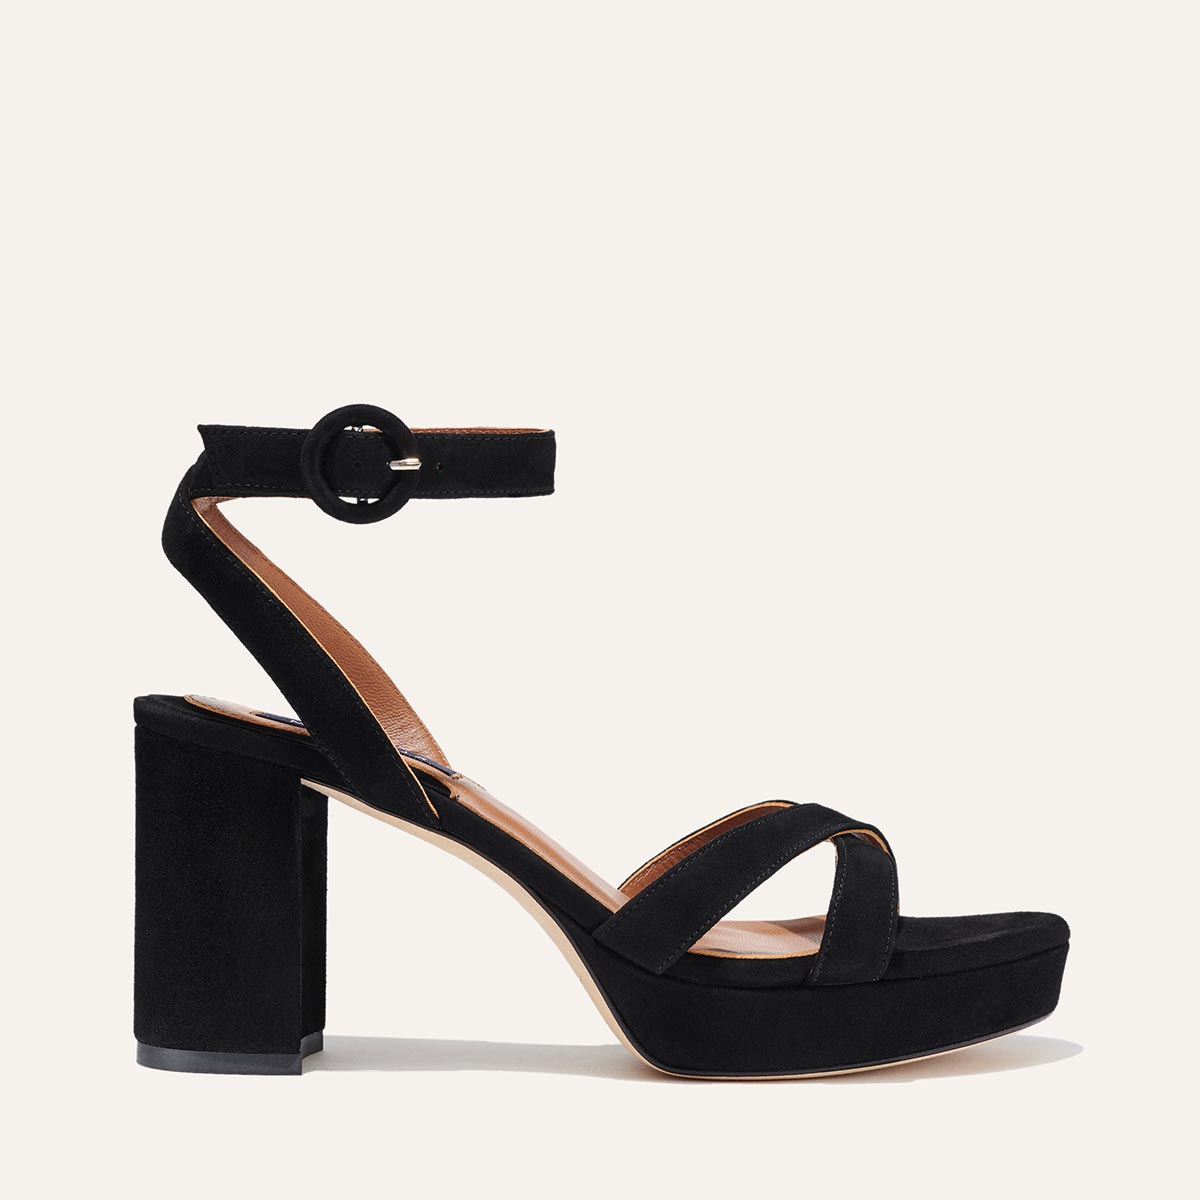 Margaux's classic and comfortable Platform Sandal in black Italian suede with crossed straps and a walkable block heel